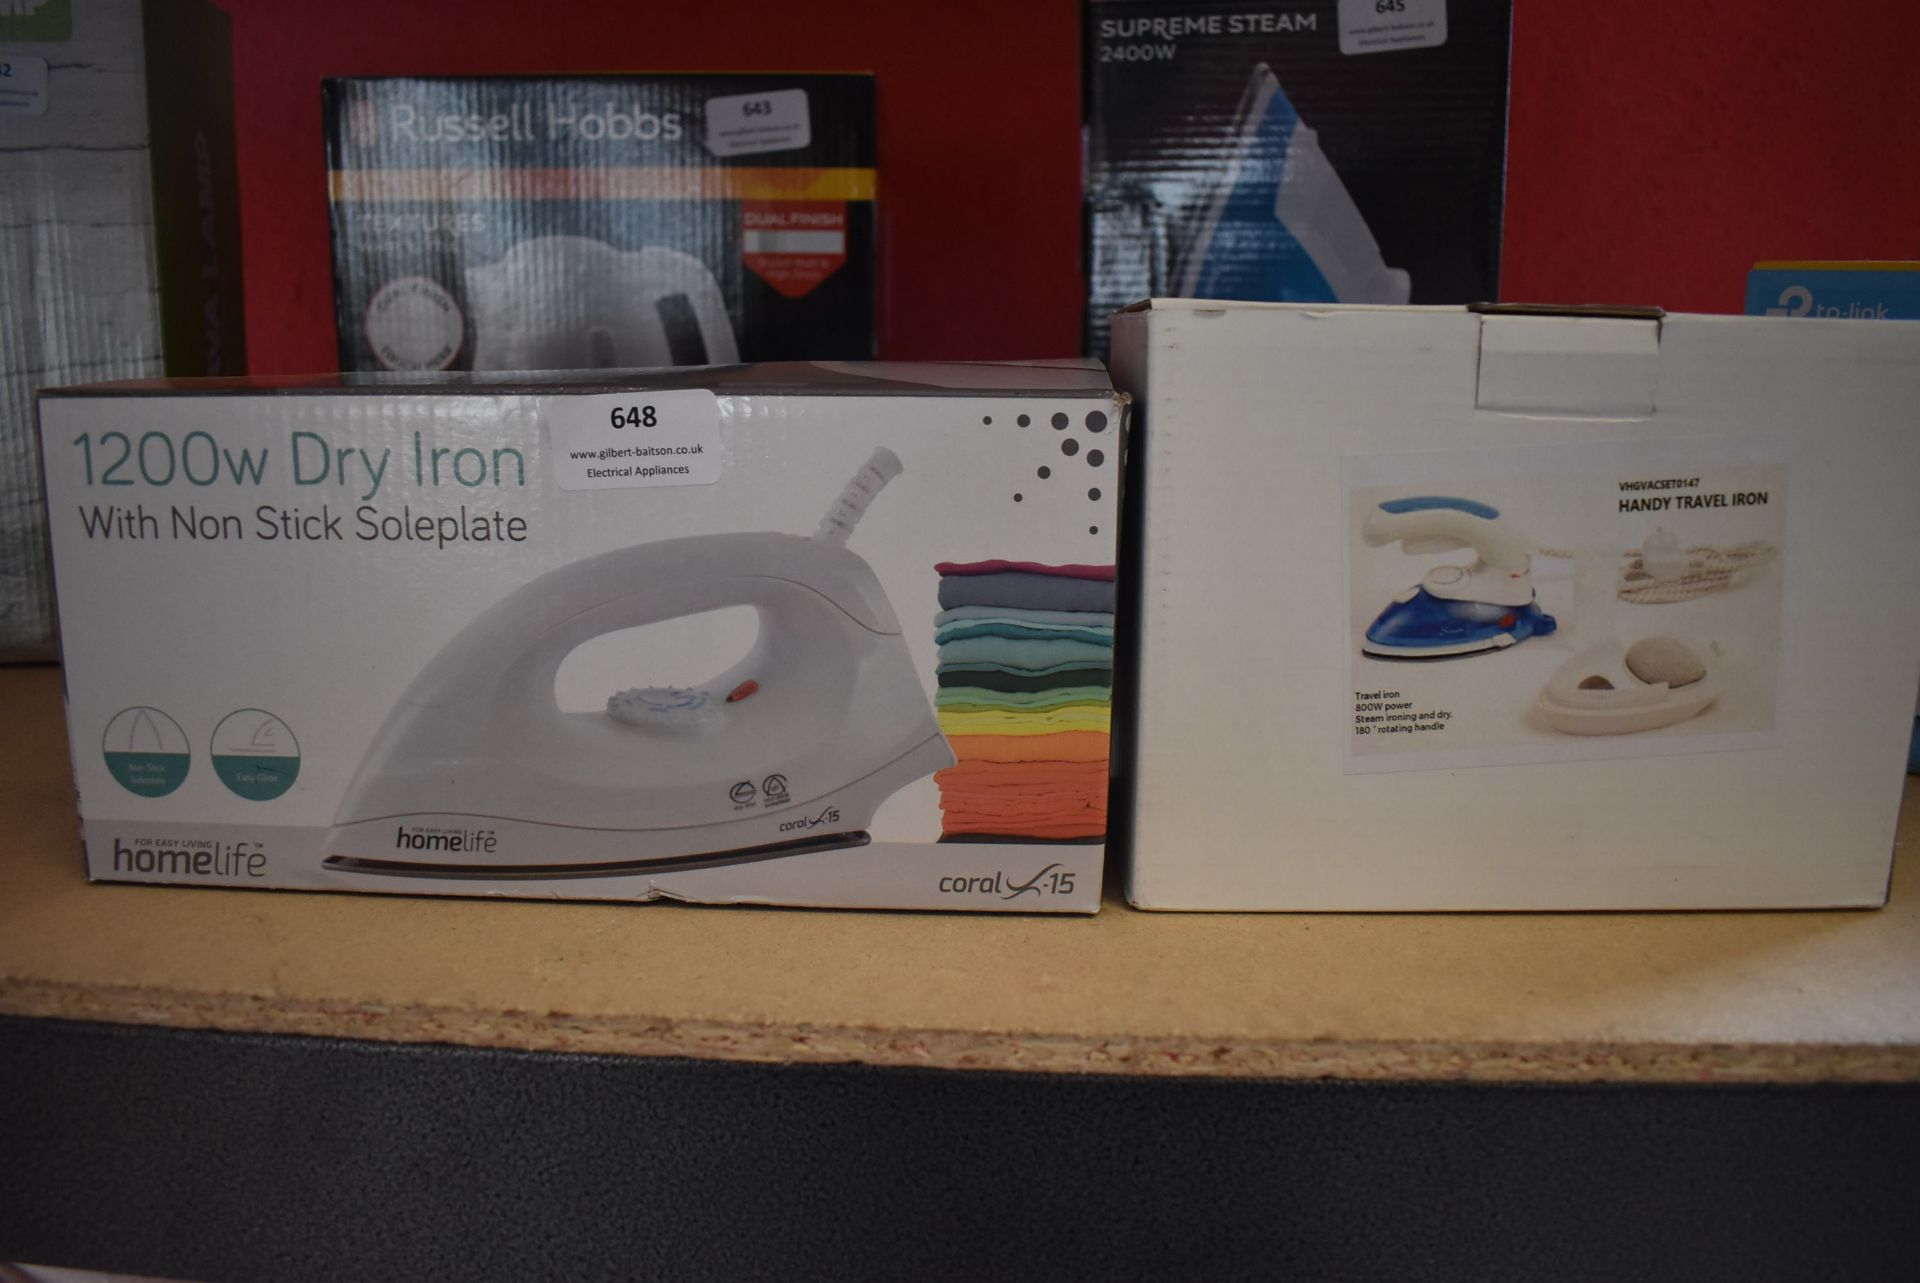 *Dry Iron with Non-Stick Soleplate and a Handy Travel Iron